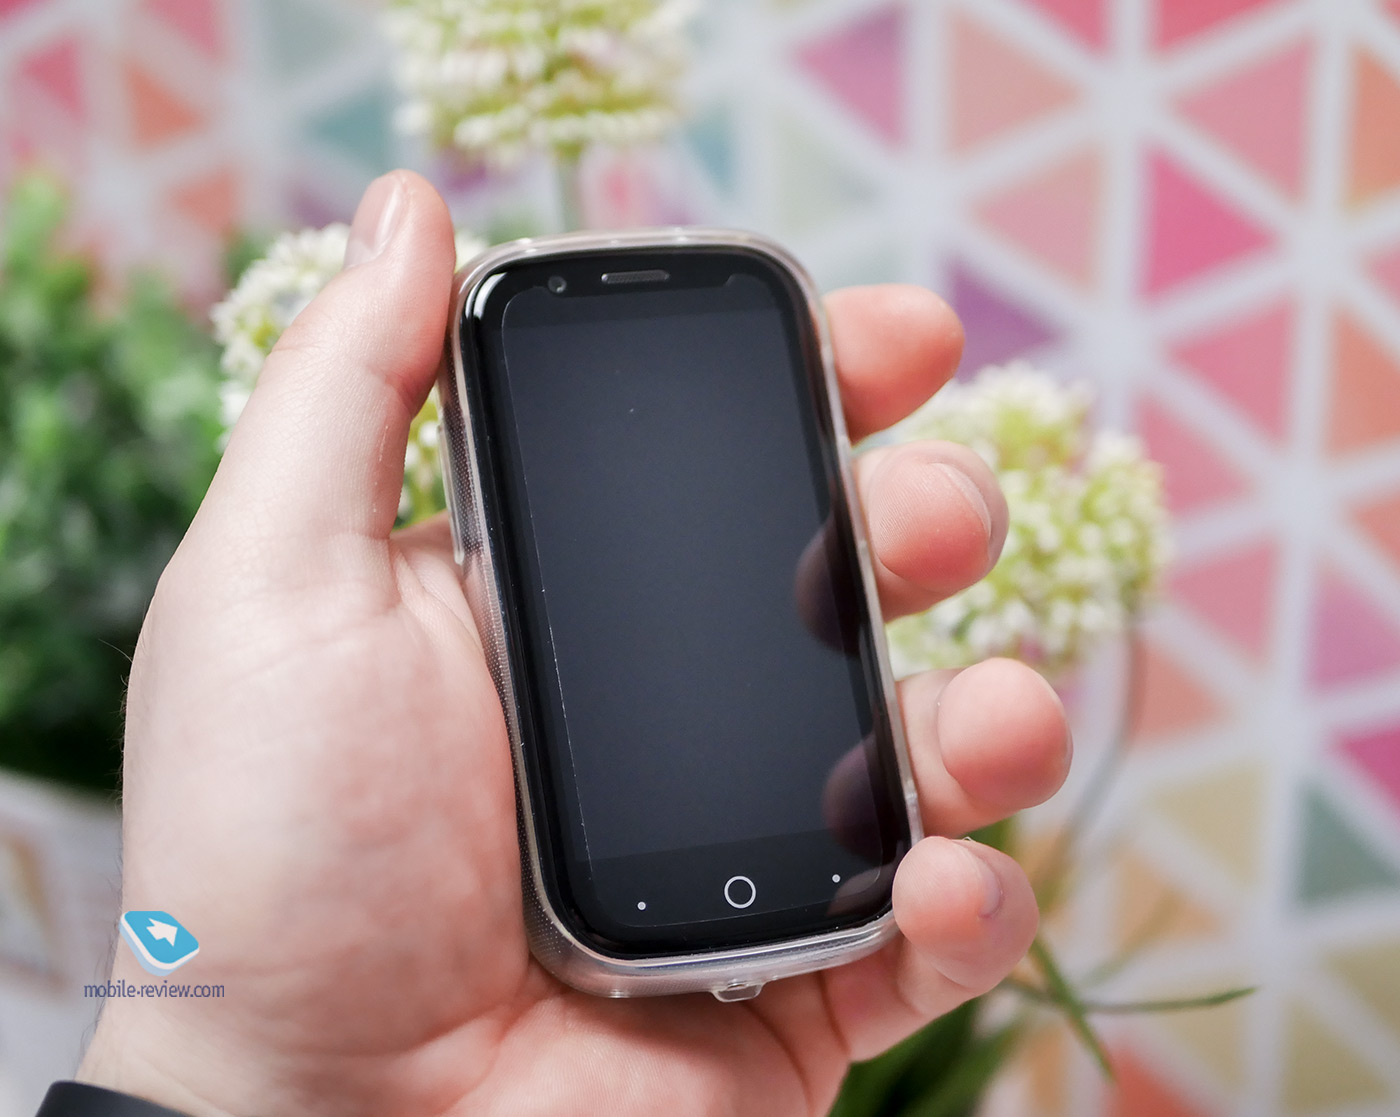 Review of the world's smallest smartphone - Unihertz Jelly 2